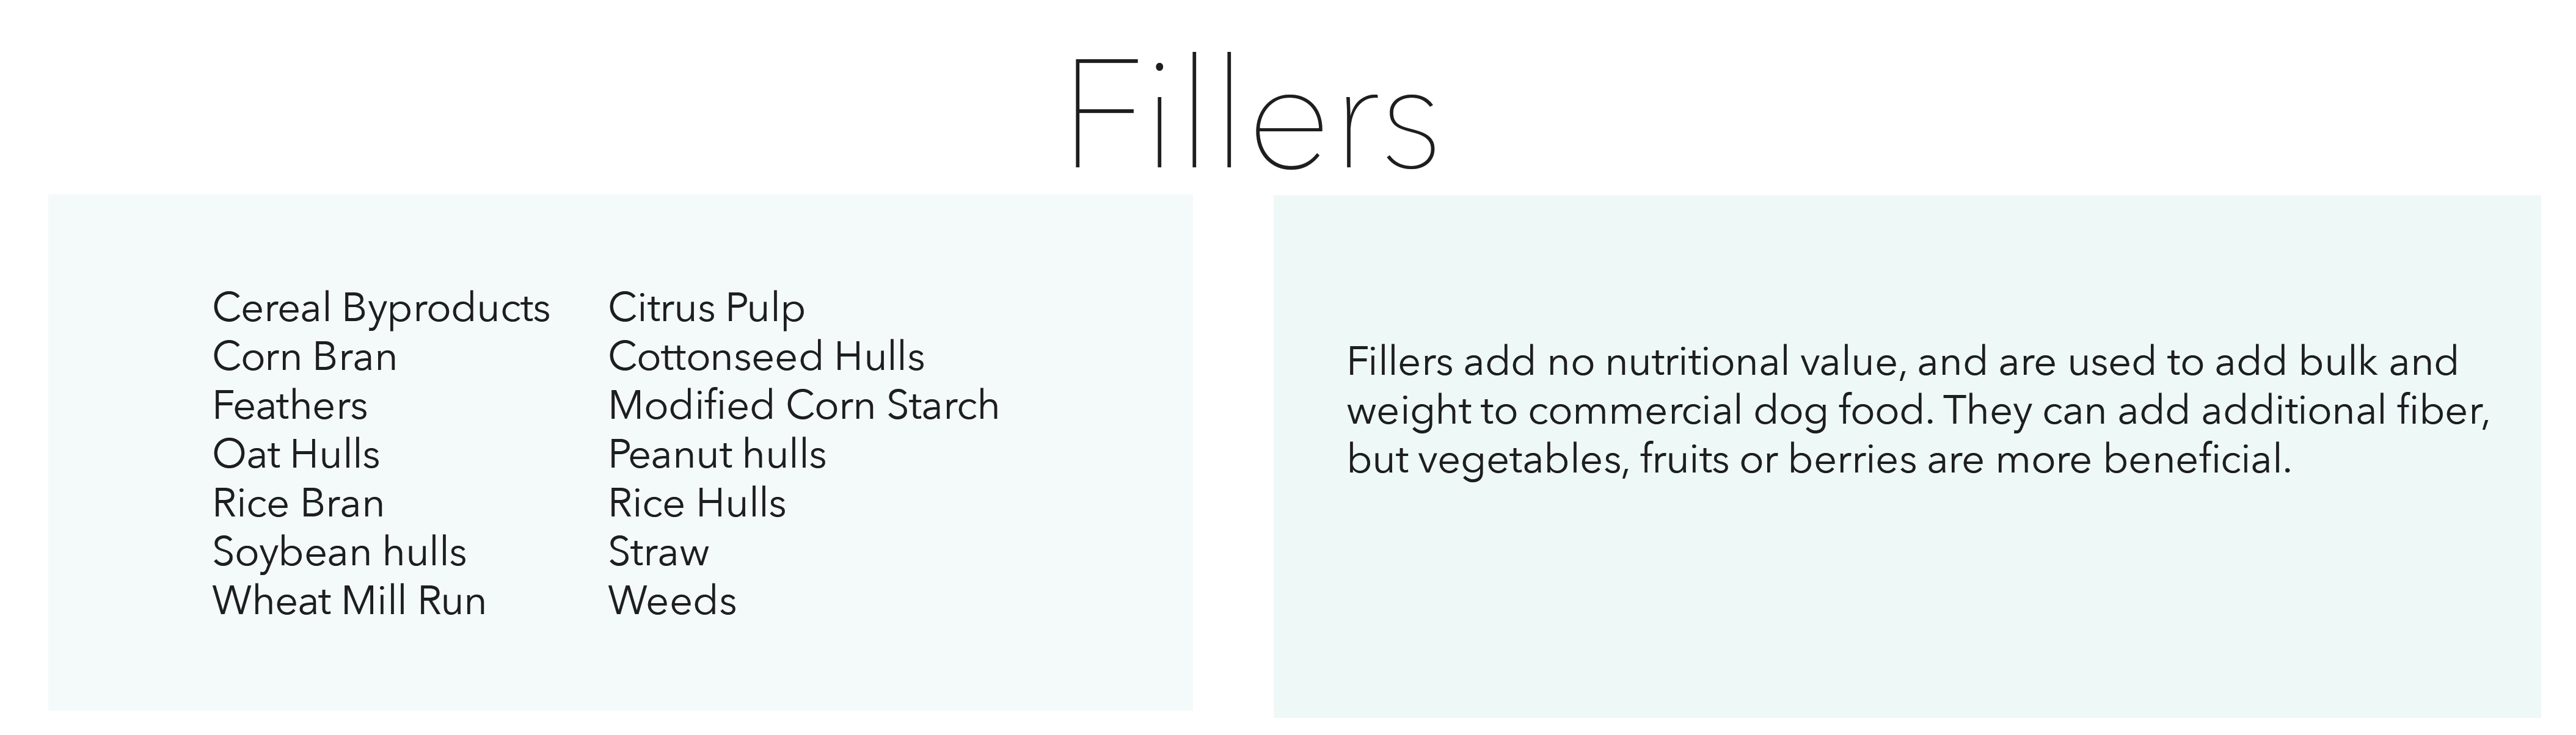 fillers in dog food 